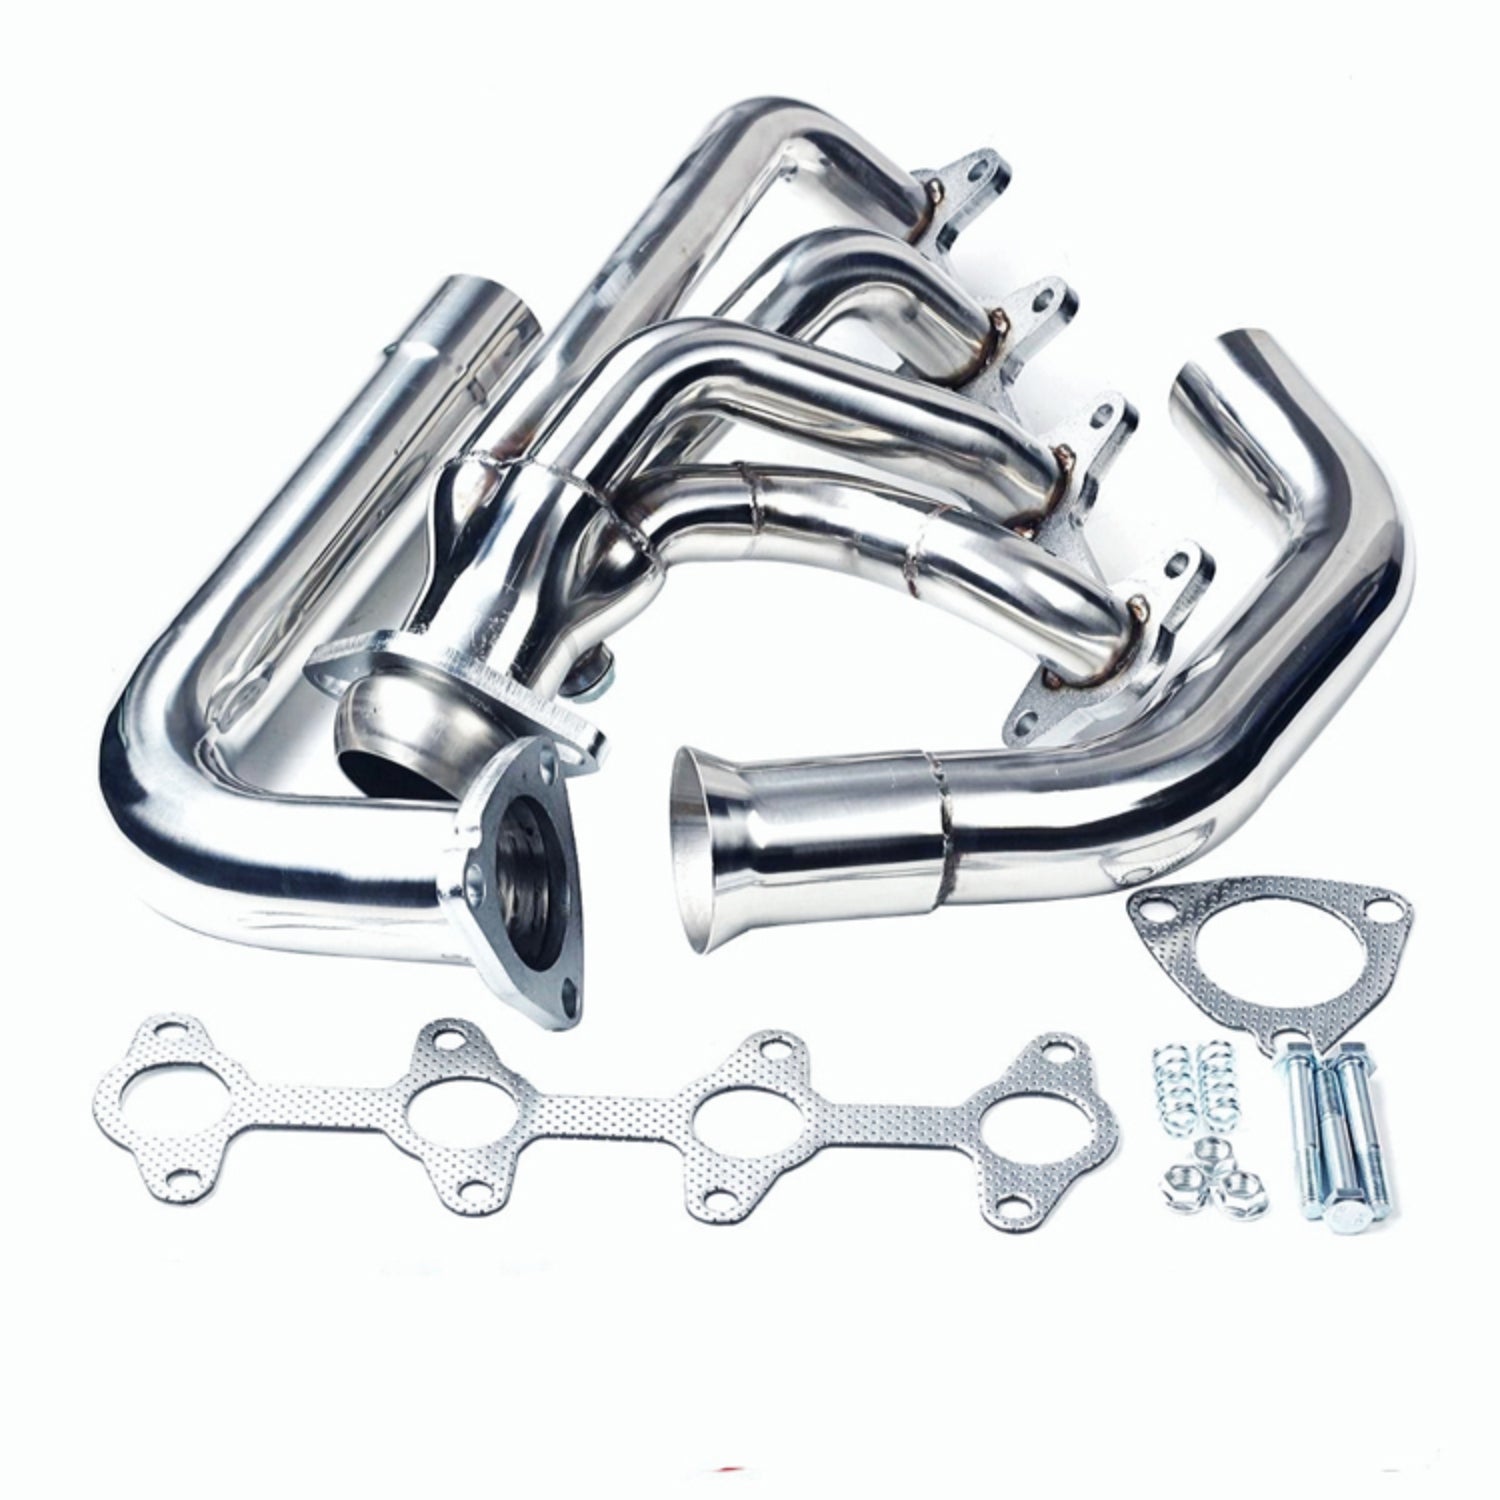 Stainless Exhaust Manifold Headers for 1994-2004 Chevy S10 GMC Sonoma 2.2L